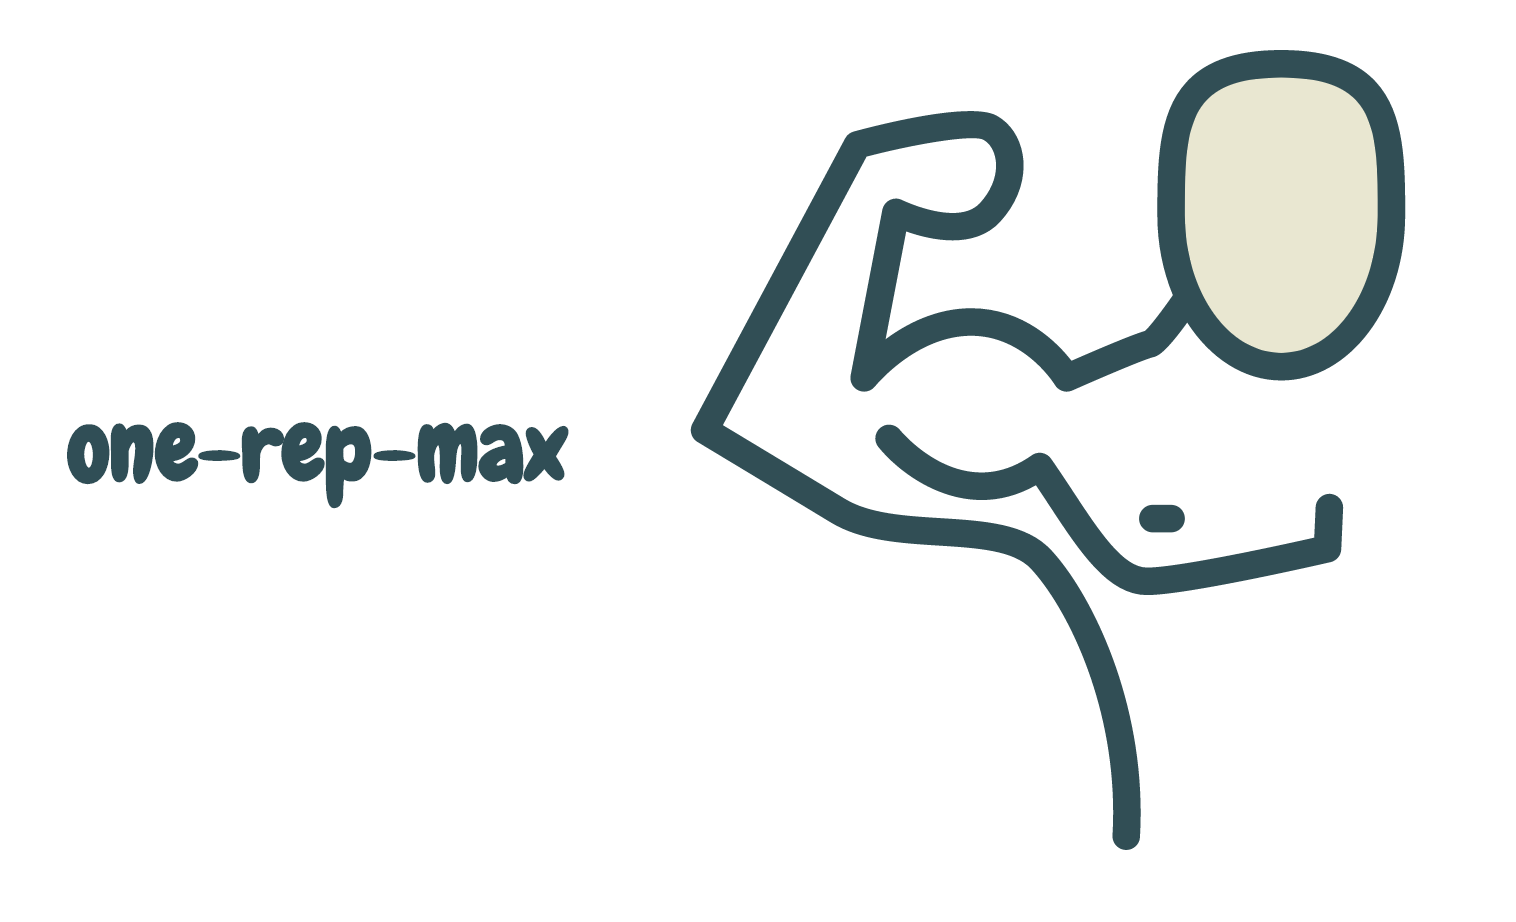 one-rep-max